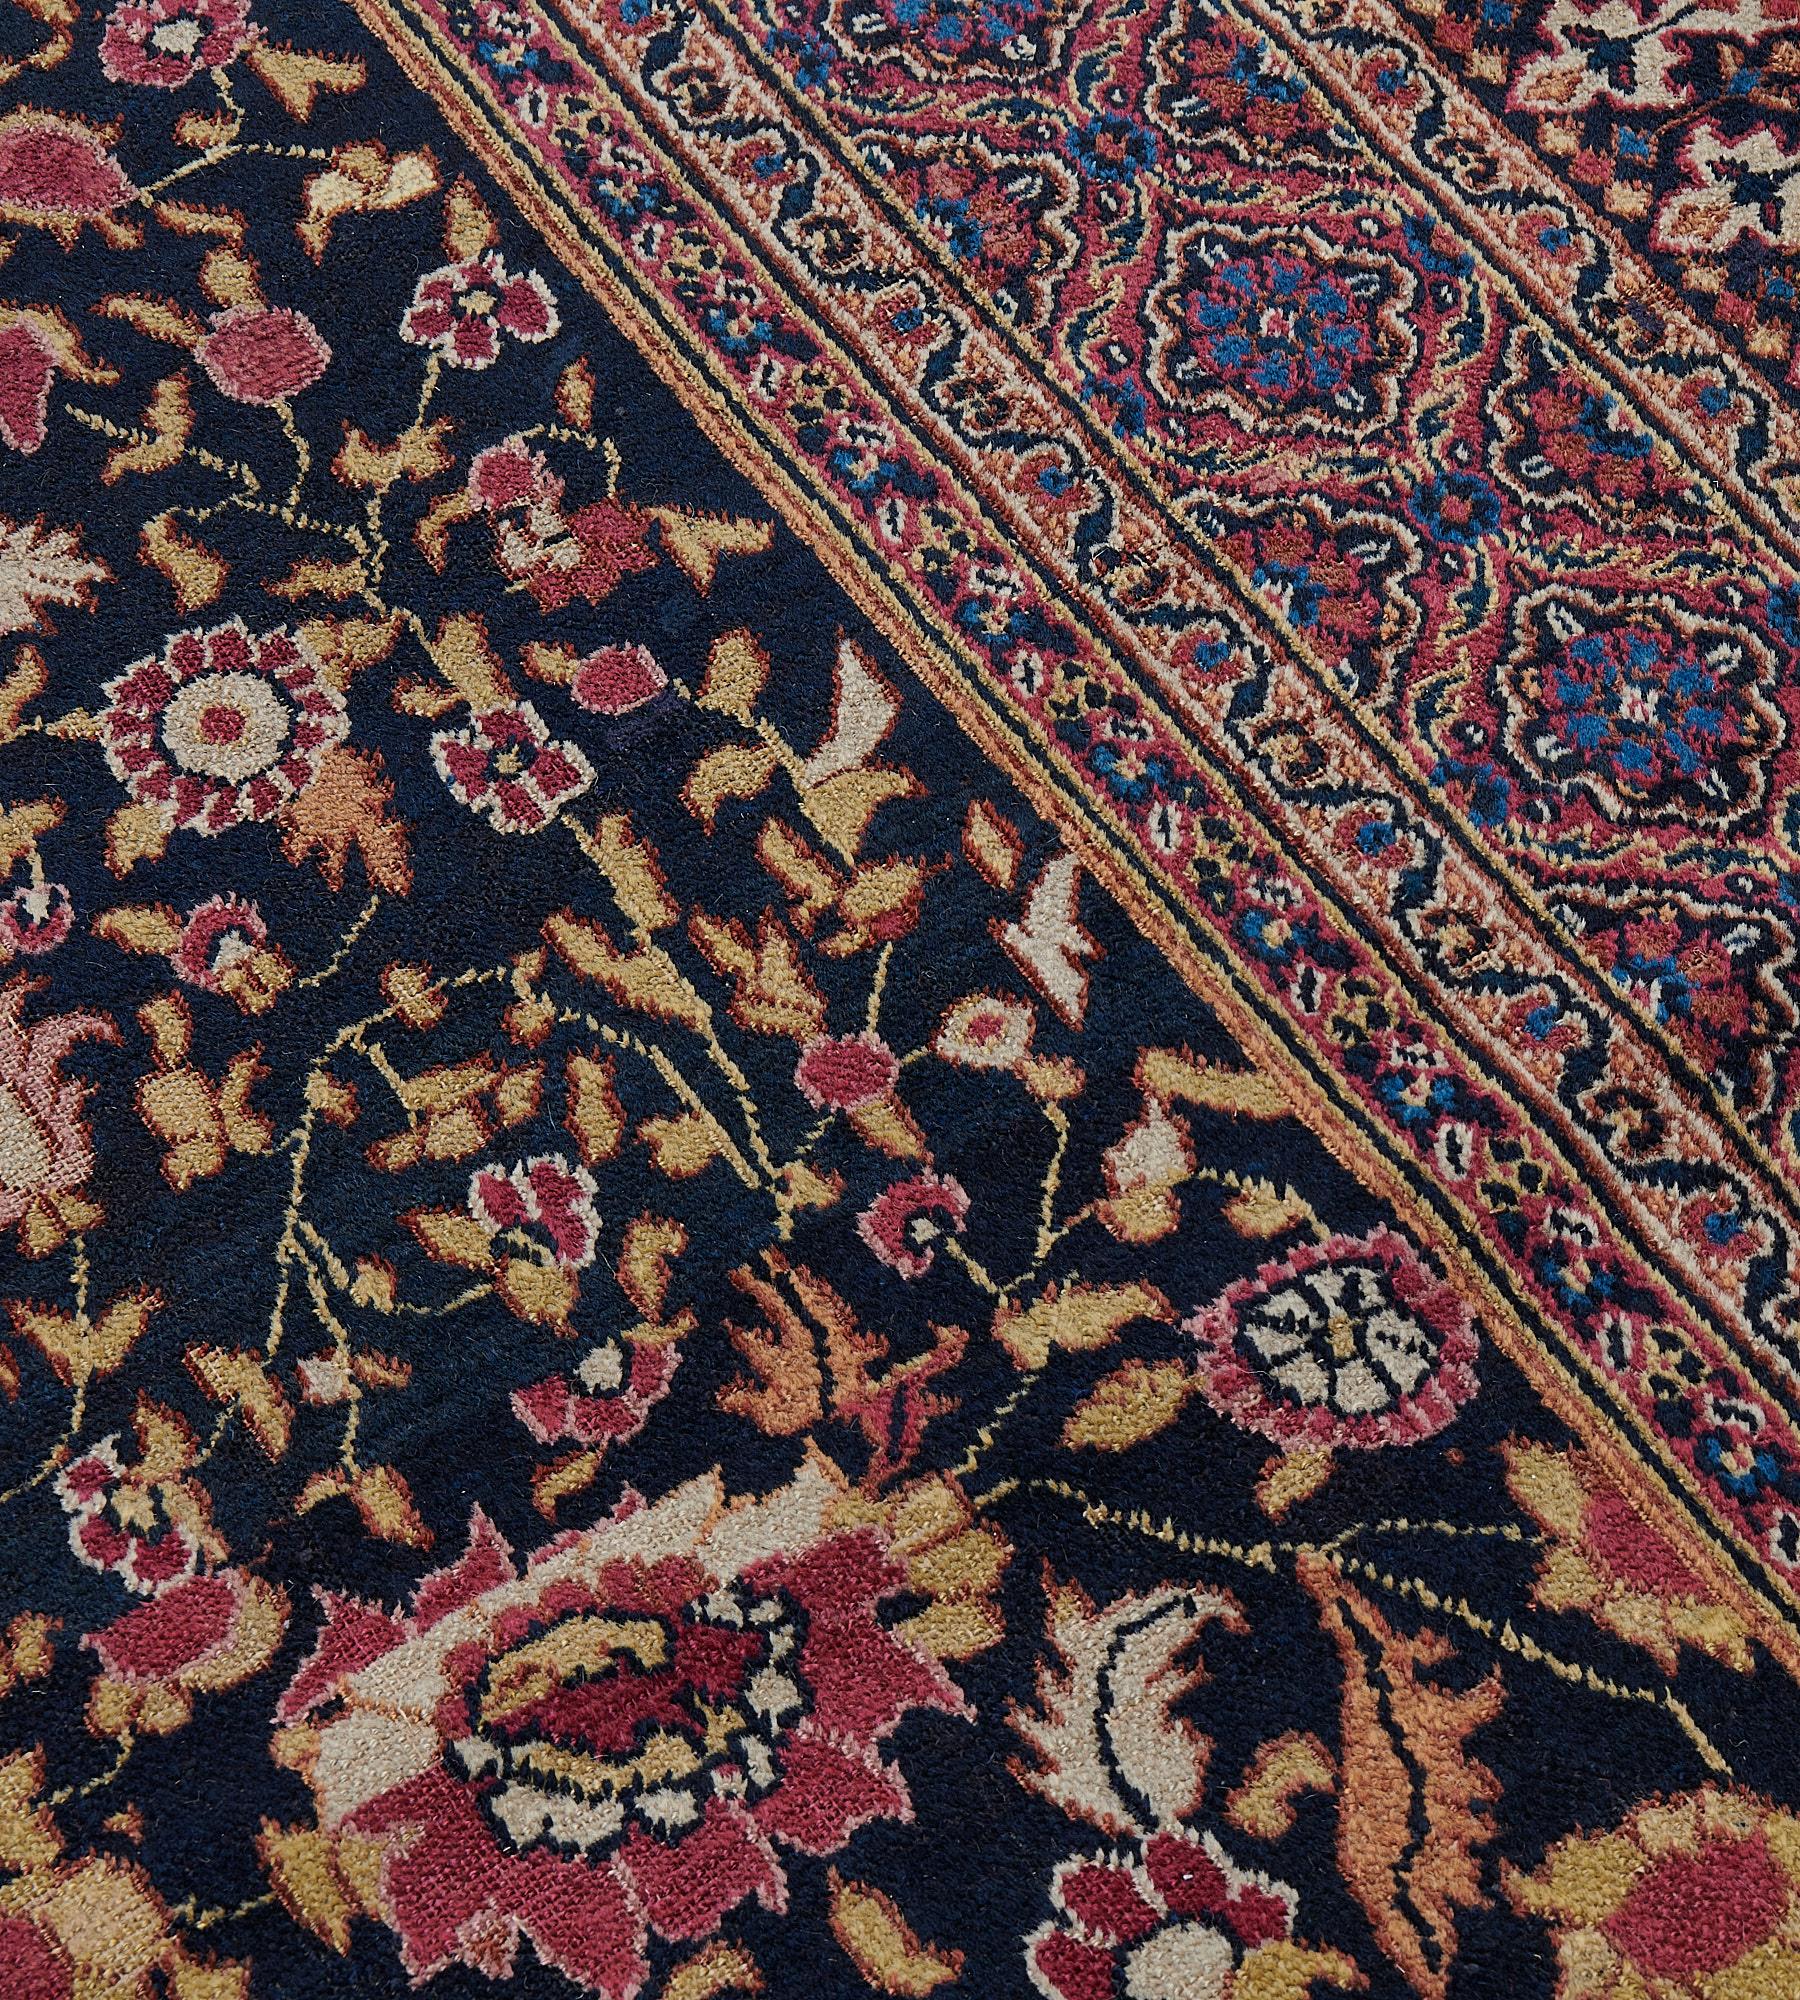 Wool Handwoven Antique circa 1880 Khorassan Rug In Good Condition For Sale In West Hollywood, CA